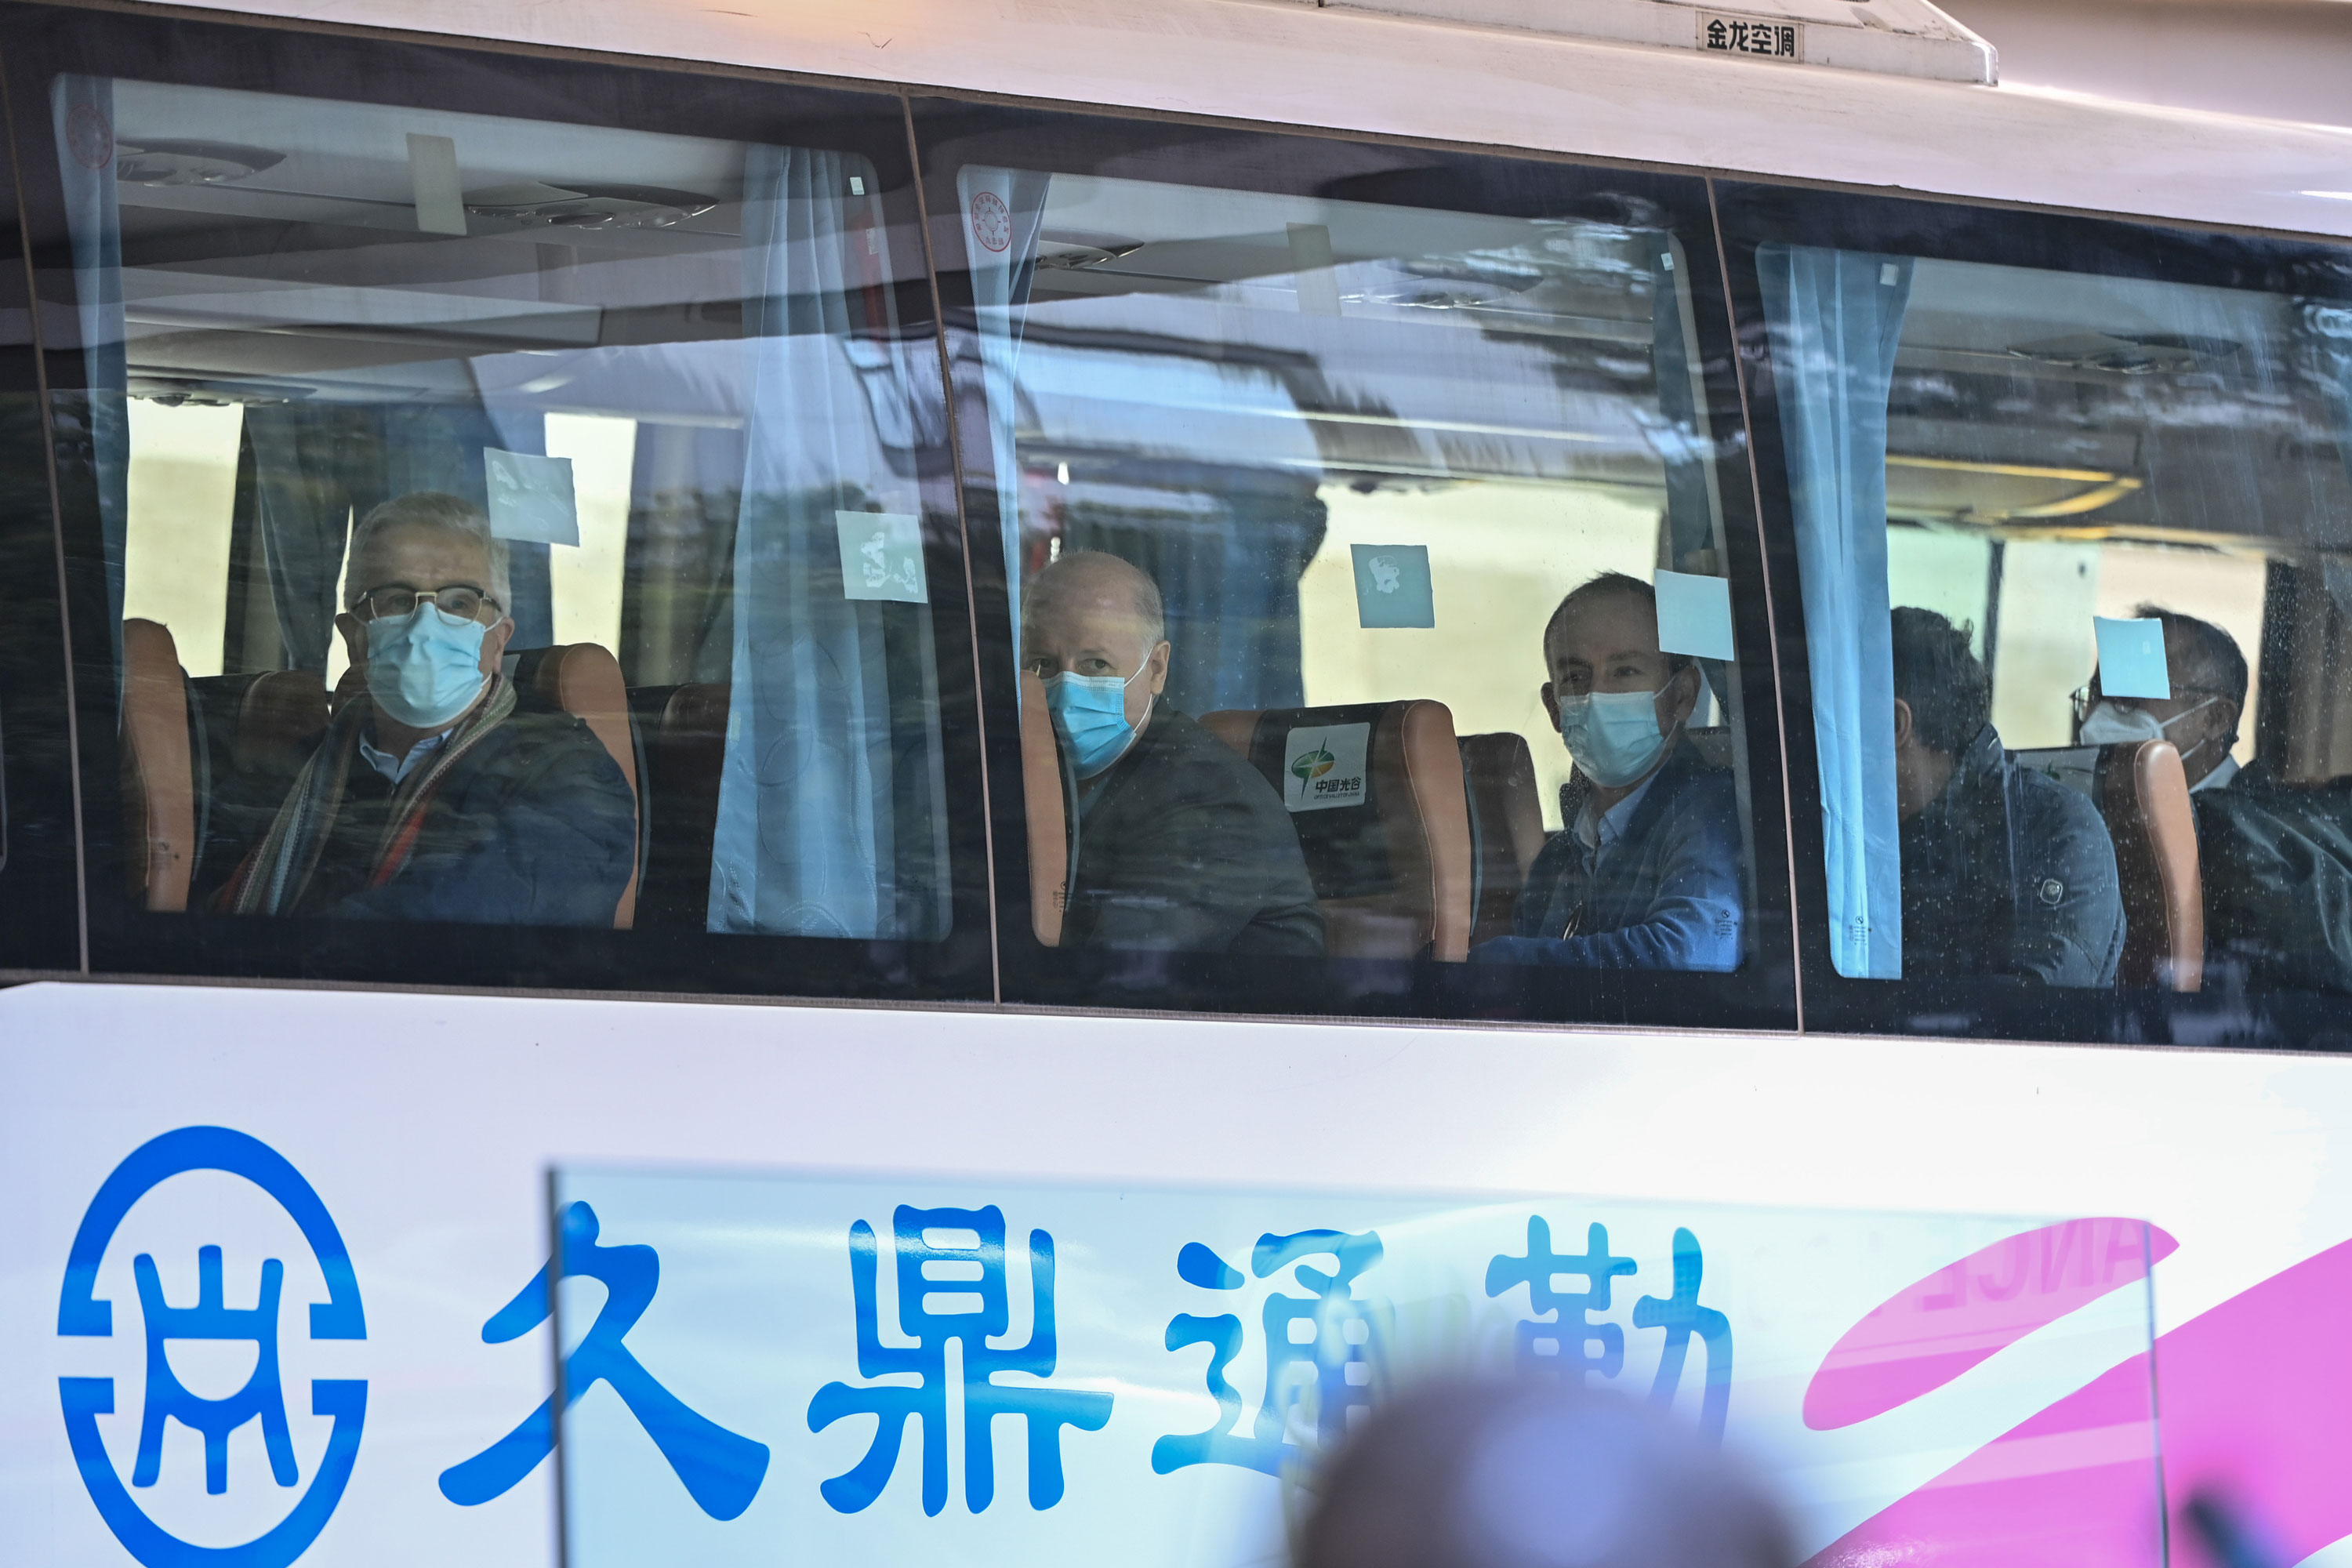 Members of the World Health Organization team investigating the origins of the Covid-19 coronavirus pandemic leave The Jade Hotel on a bus after completing their quarantine in Wuhan, China on January 28.